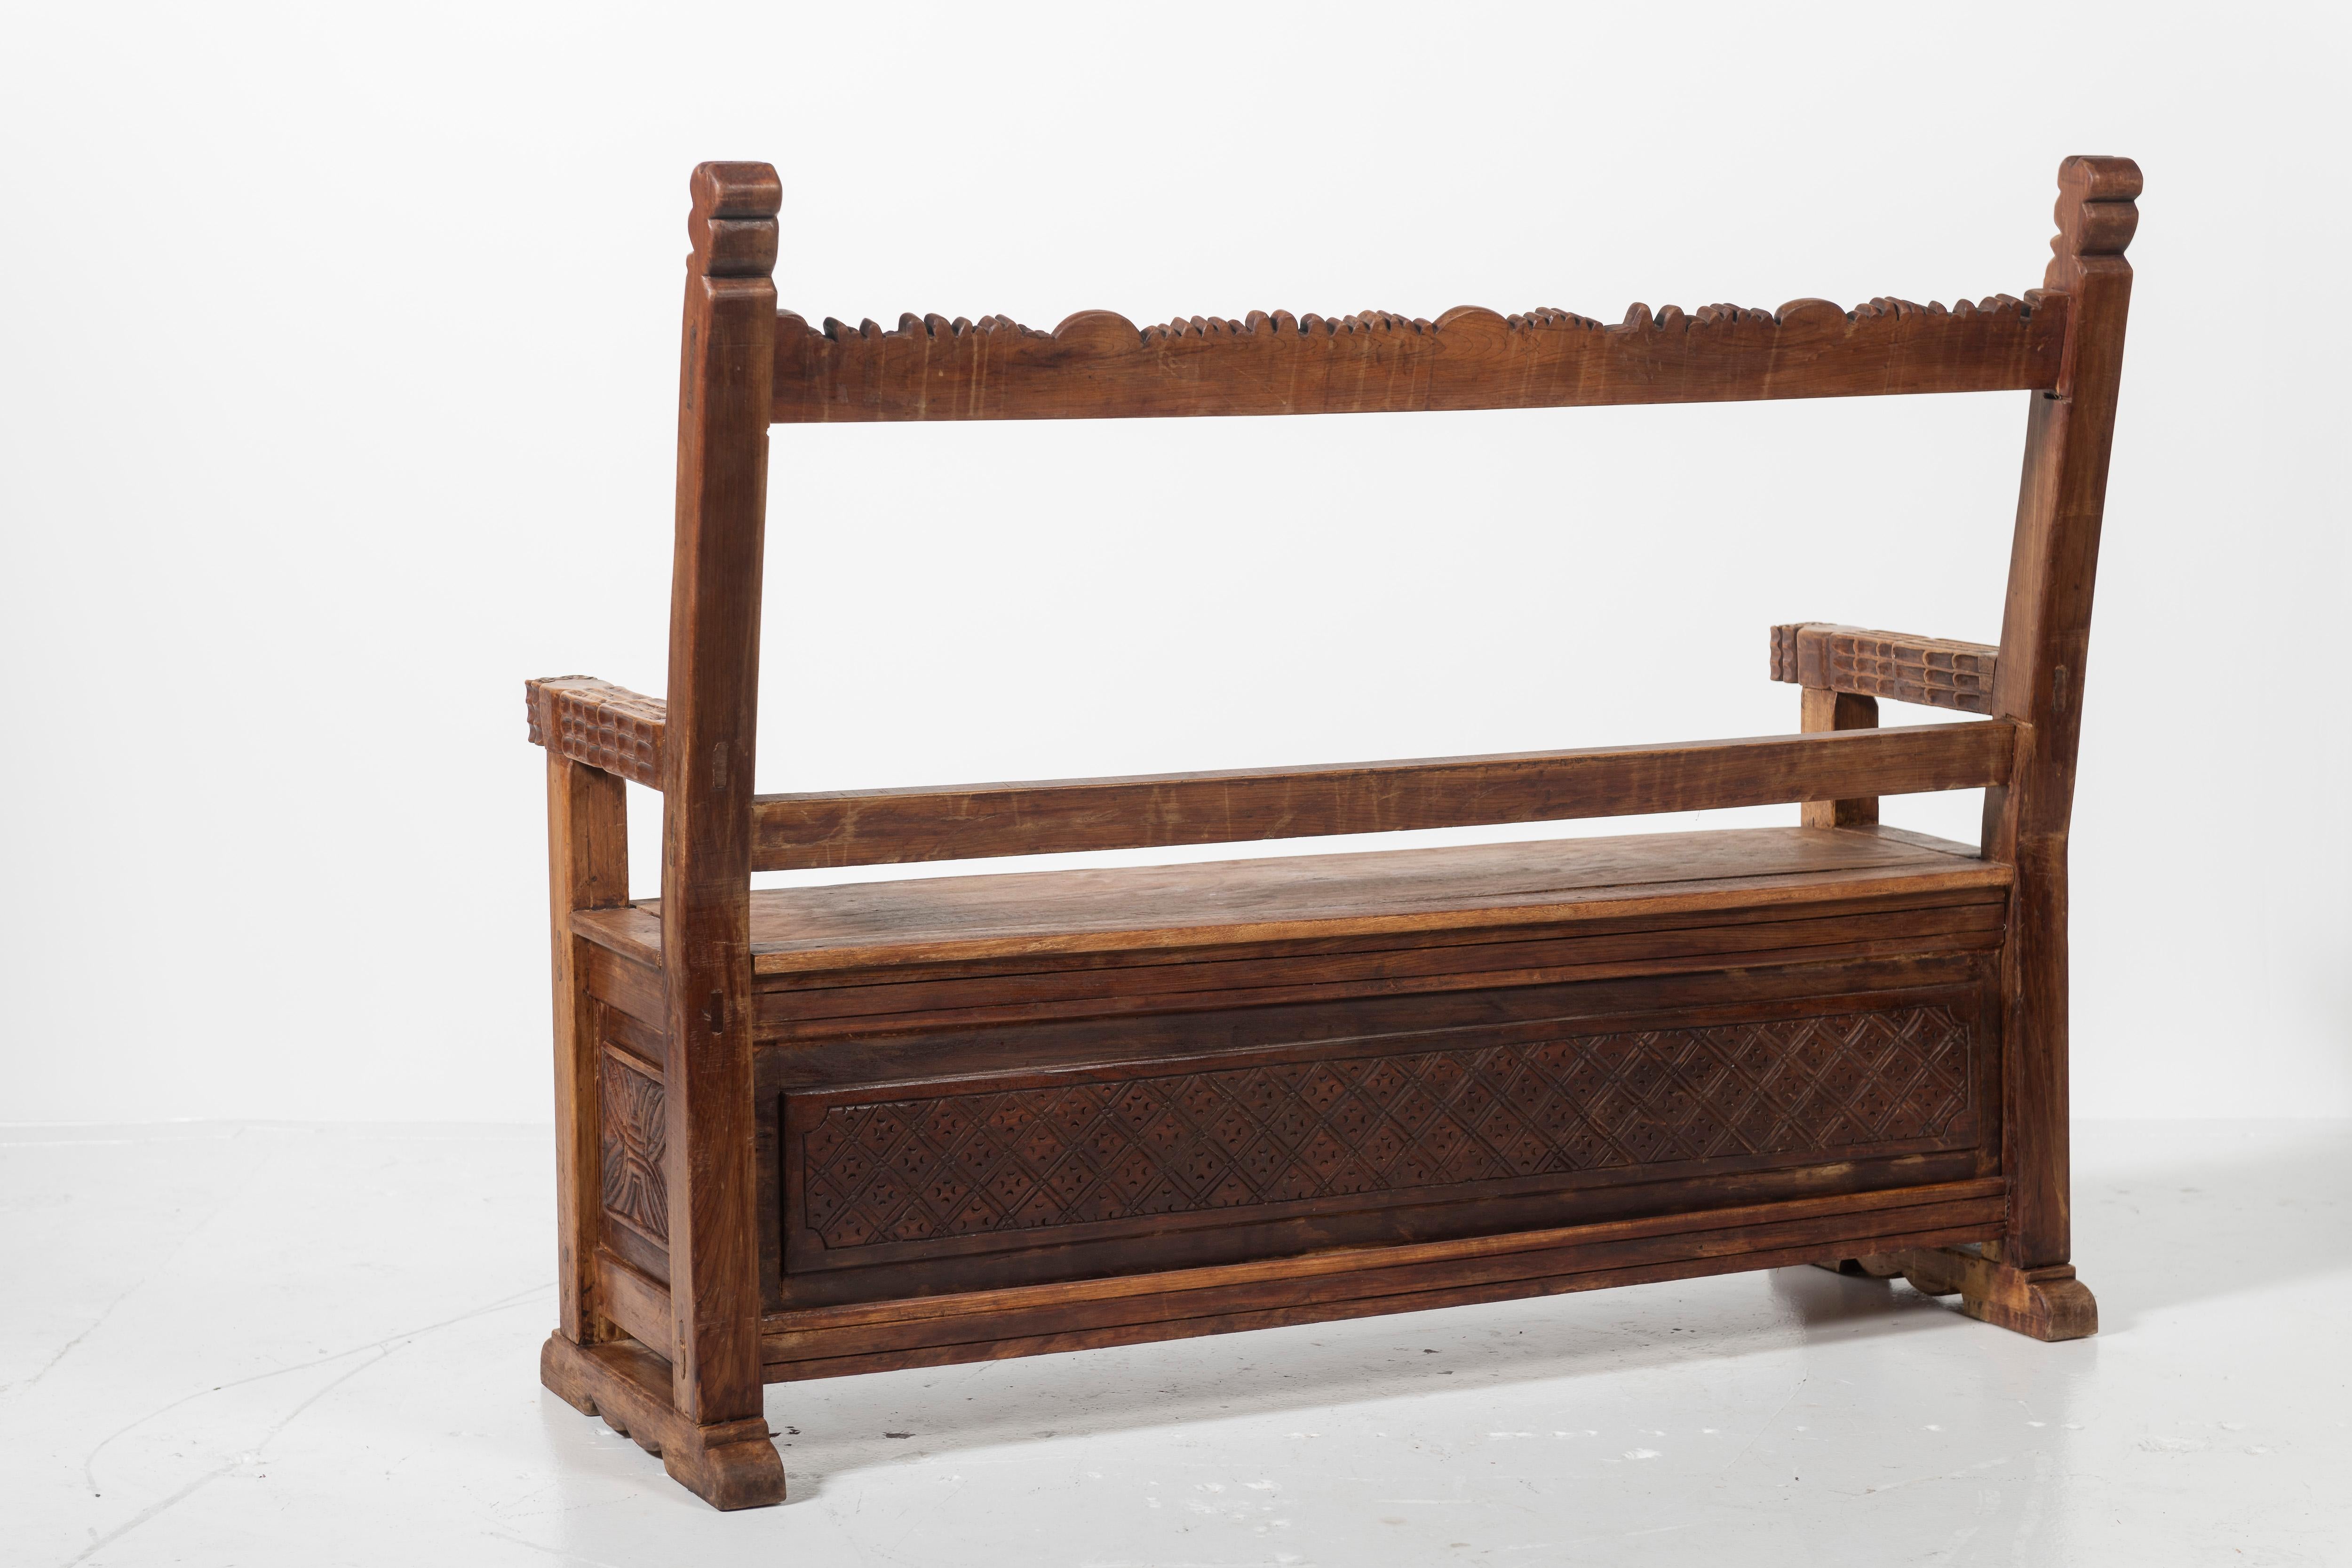 Beautifully carved mahogany bench with storage is functional and interesting from every angle.